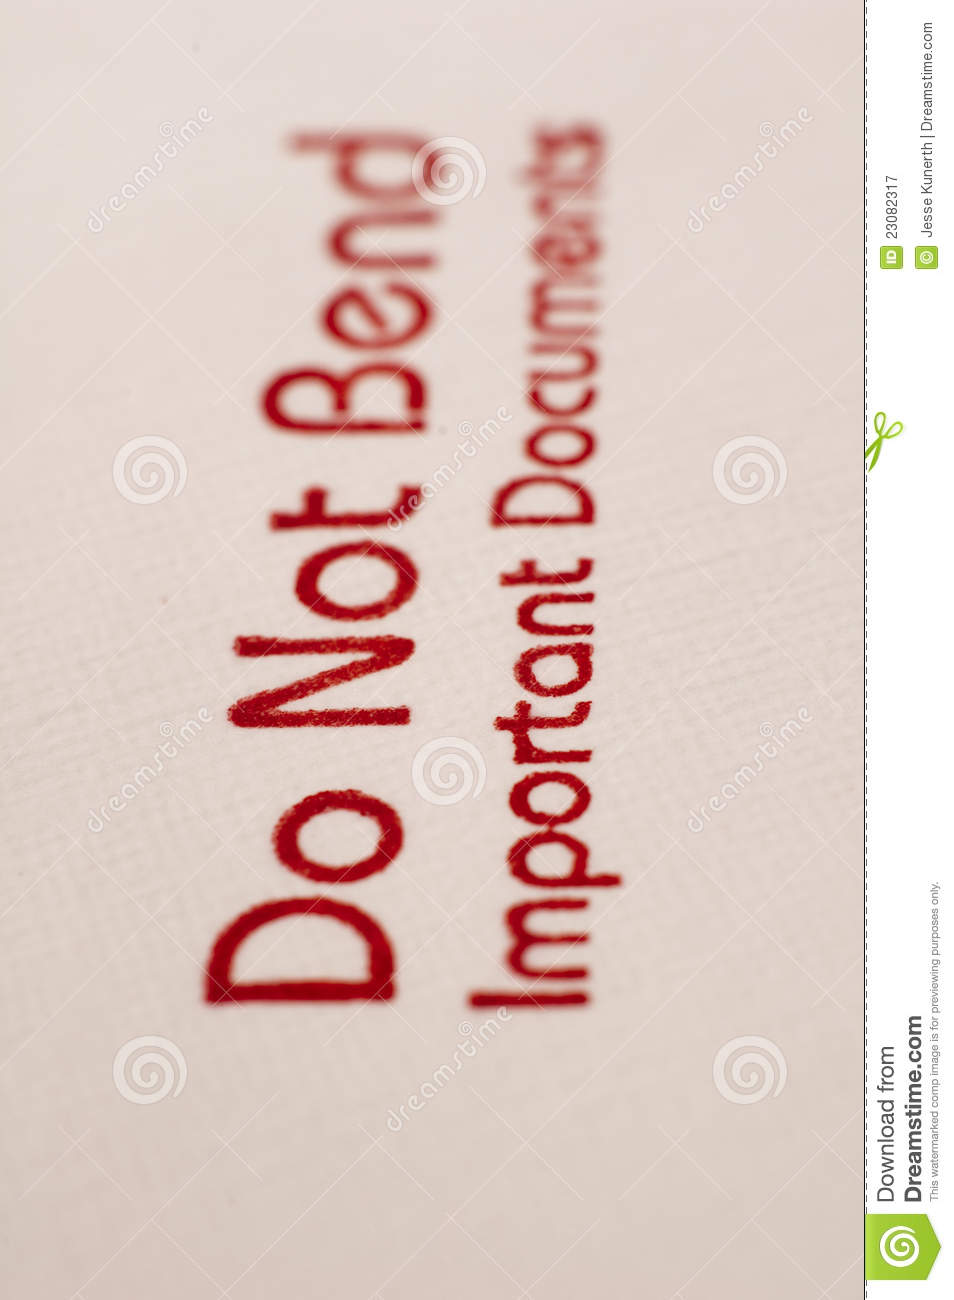 Do Not Bend Stamp Royalty Free Stock Photography   Image  23082317